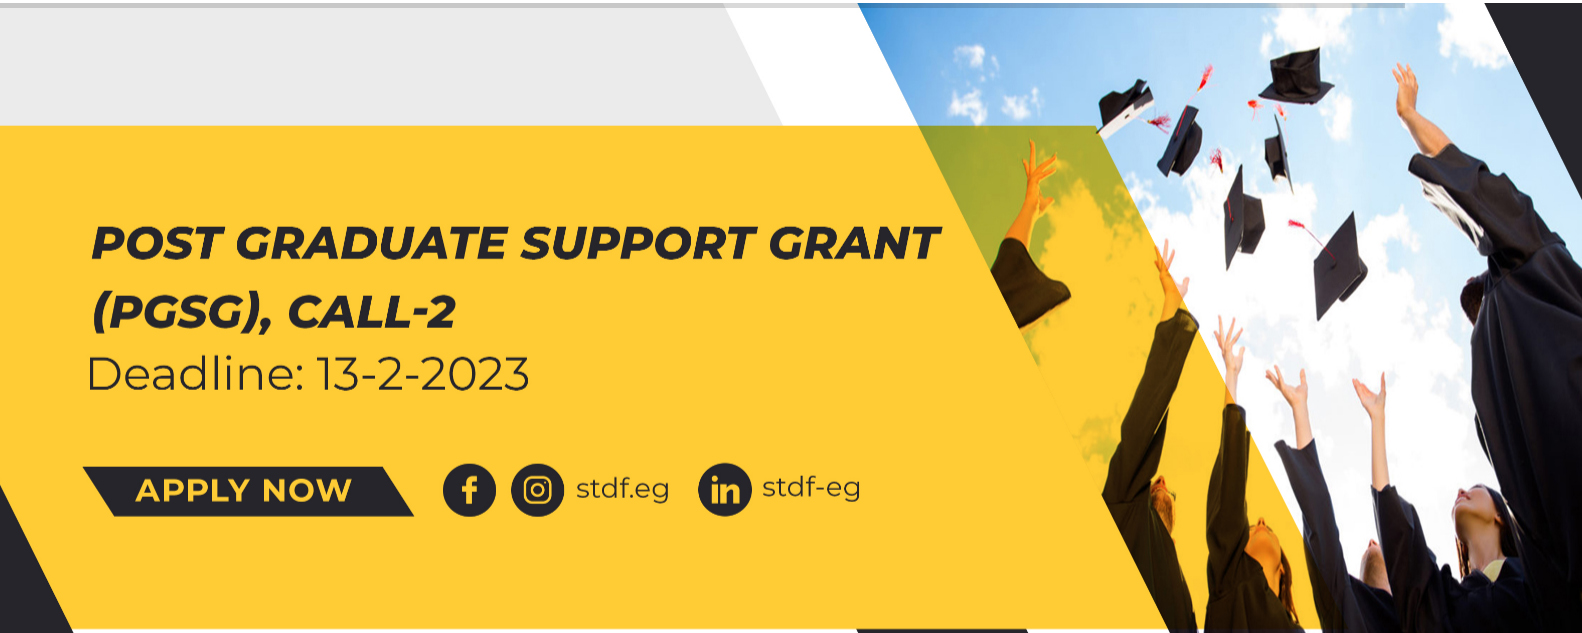 Post Graduate Support Grant (PGSG-2)